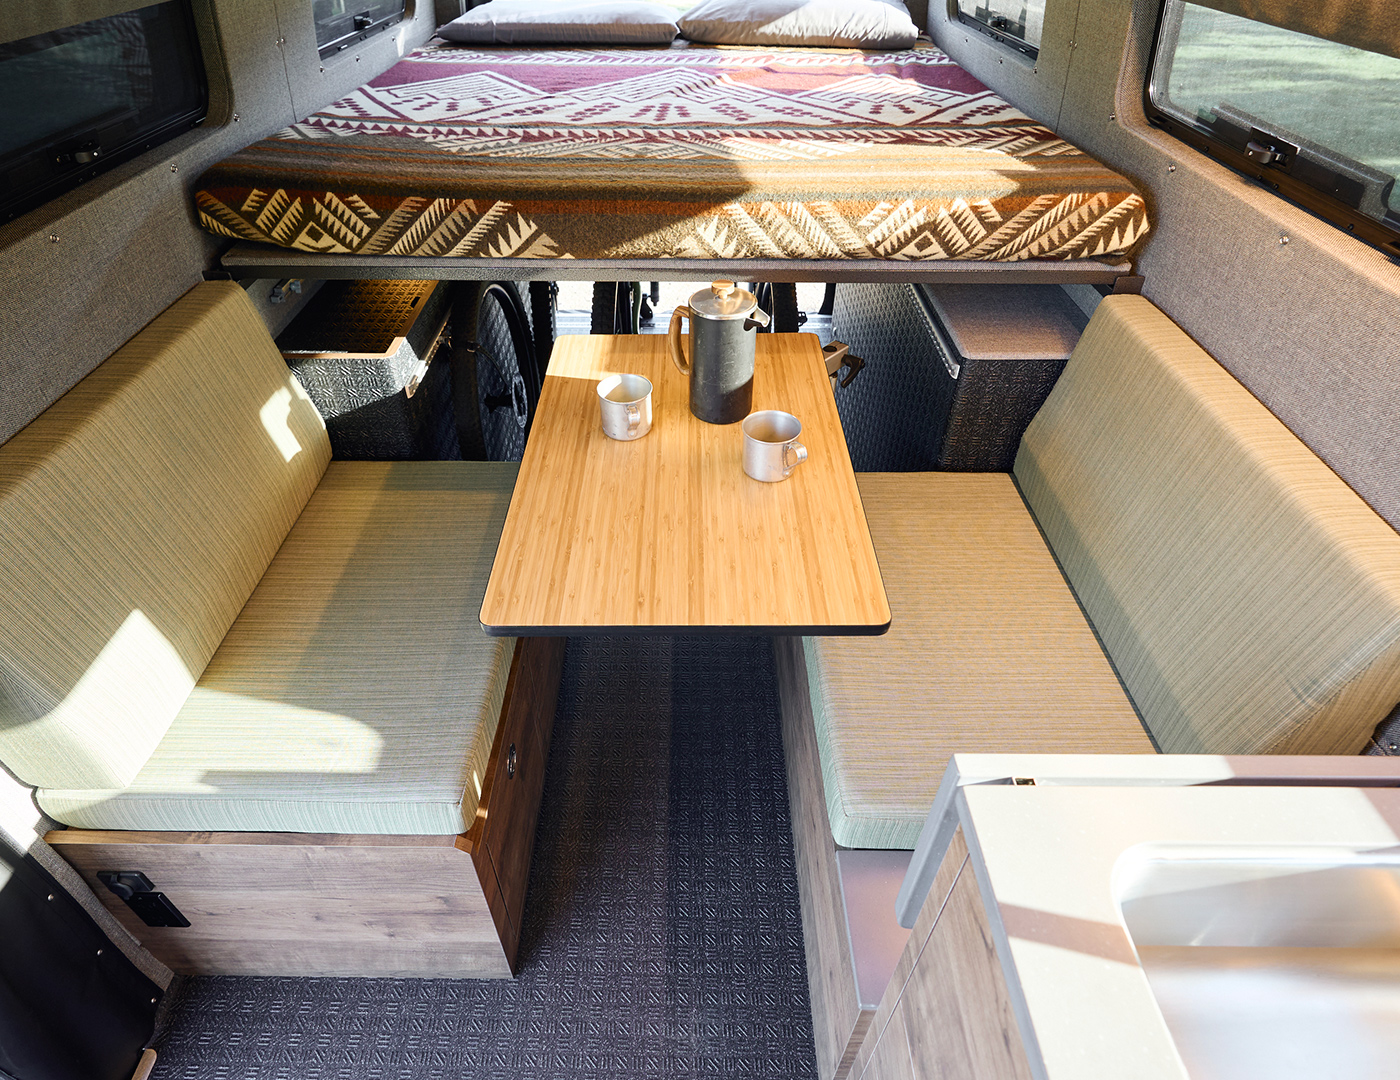 Cuckoo's Nest is a custom sprinter van with kitchen and dining area built by Outside Van in Portland Oregon